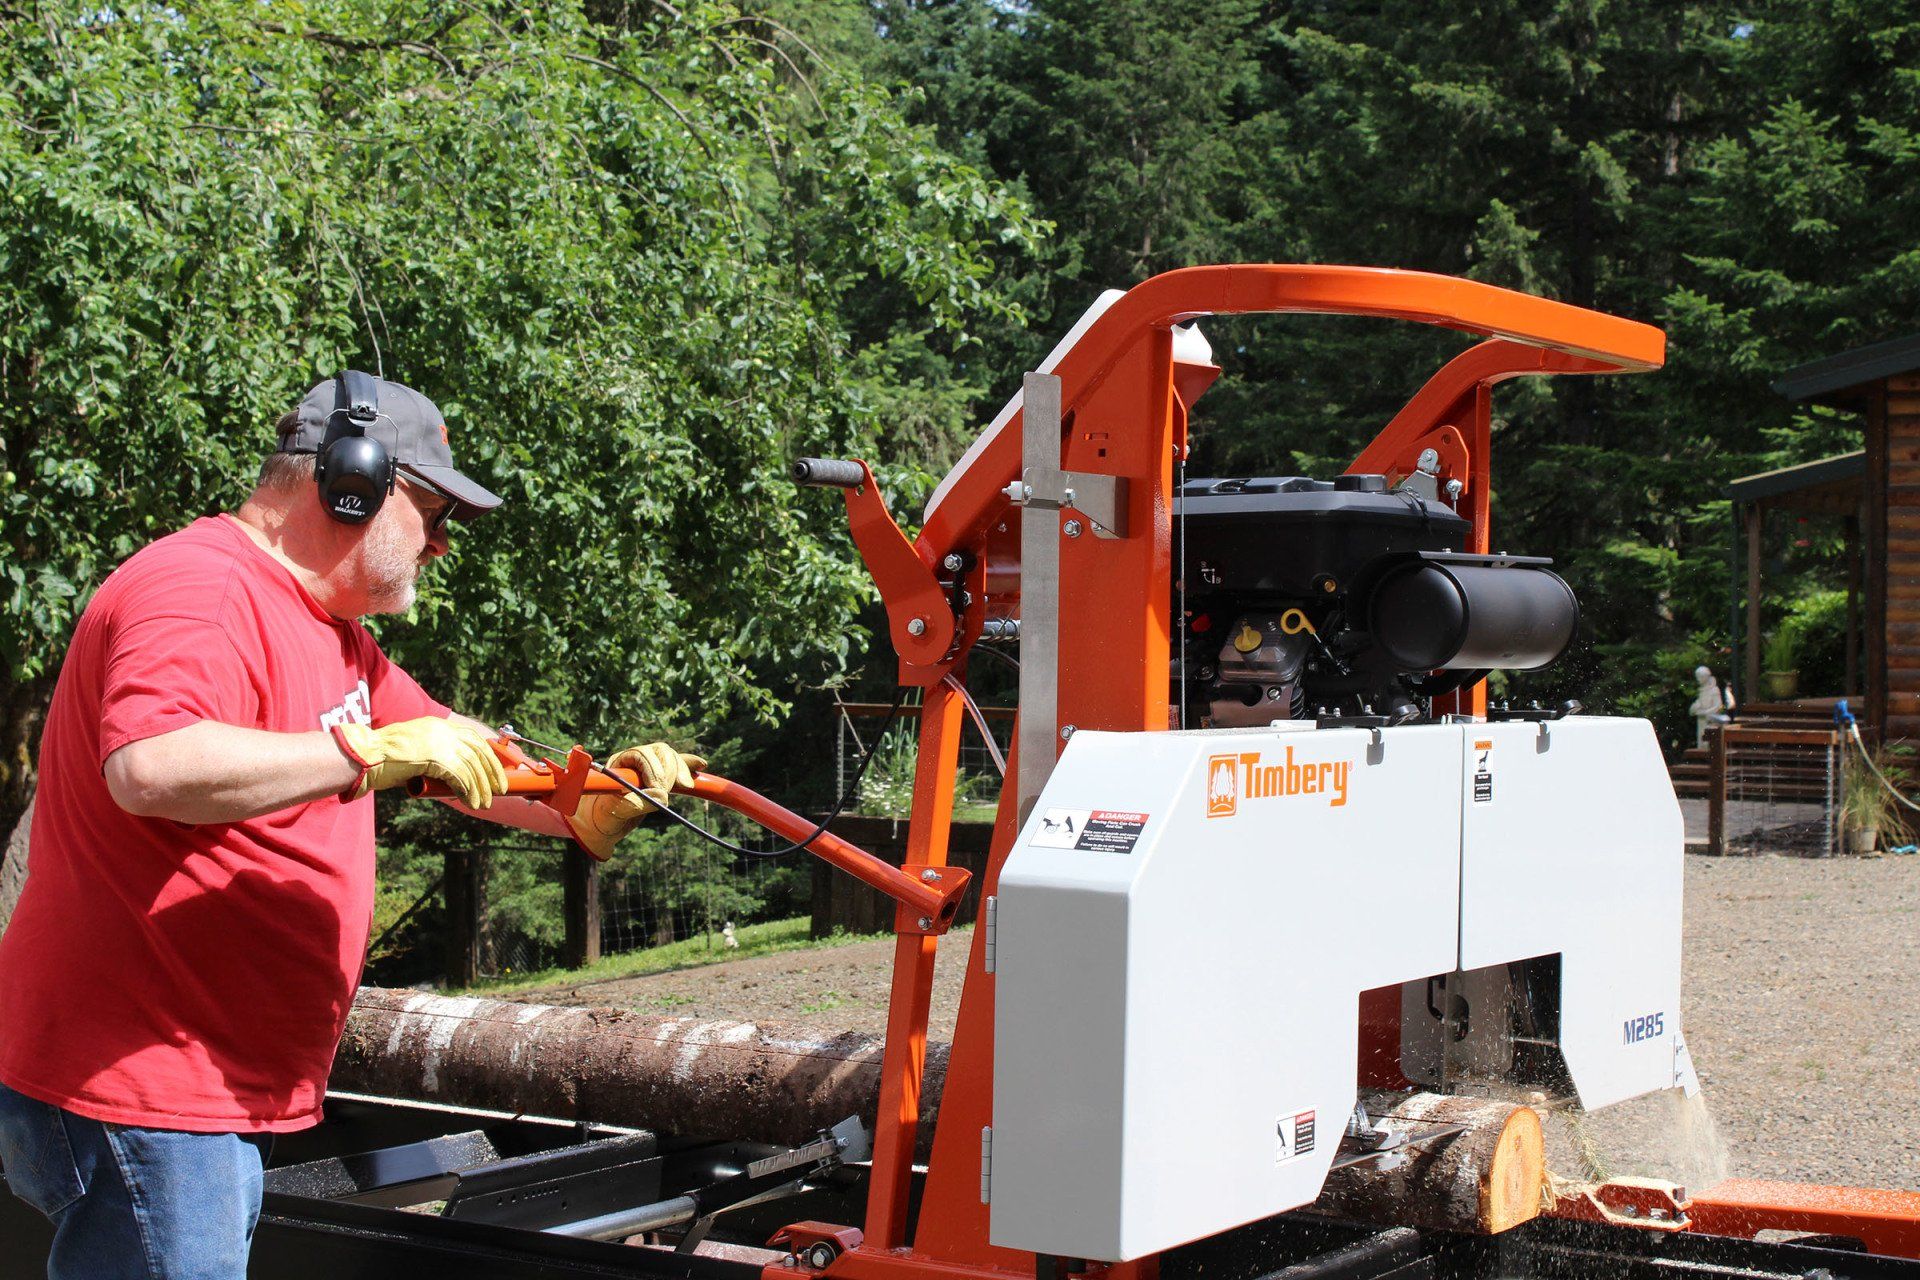 Timbery M285 portable sawmill in action